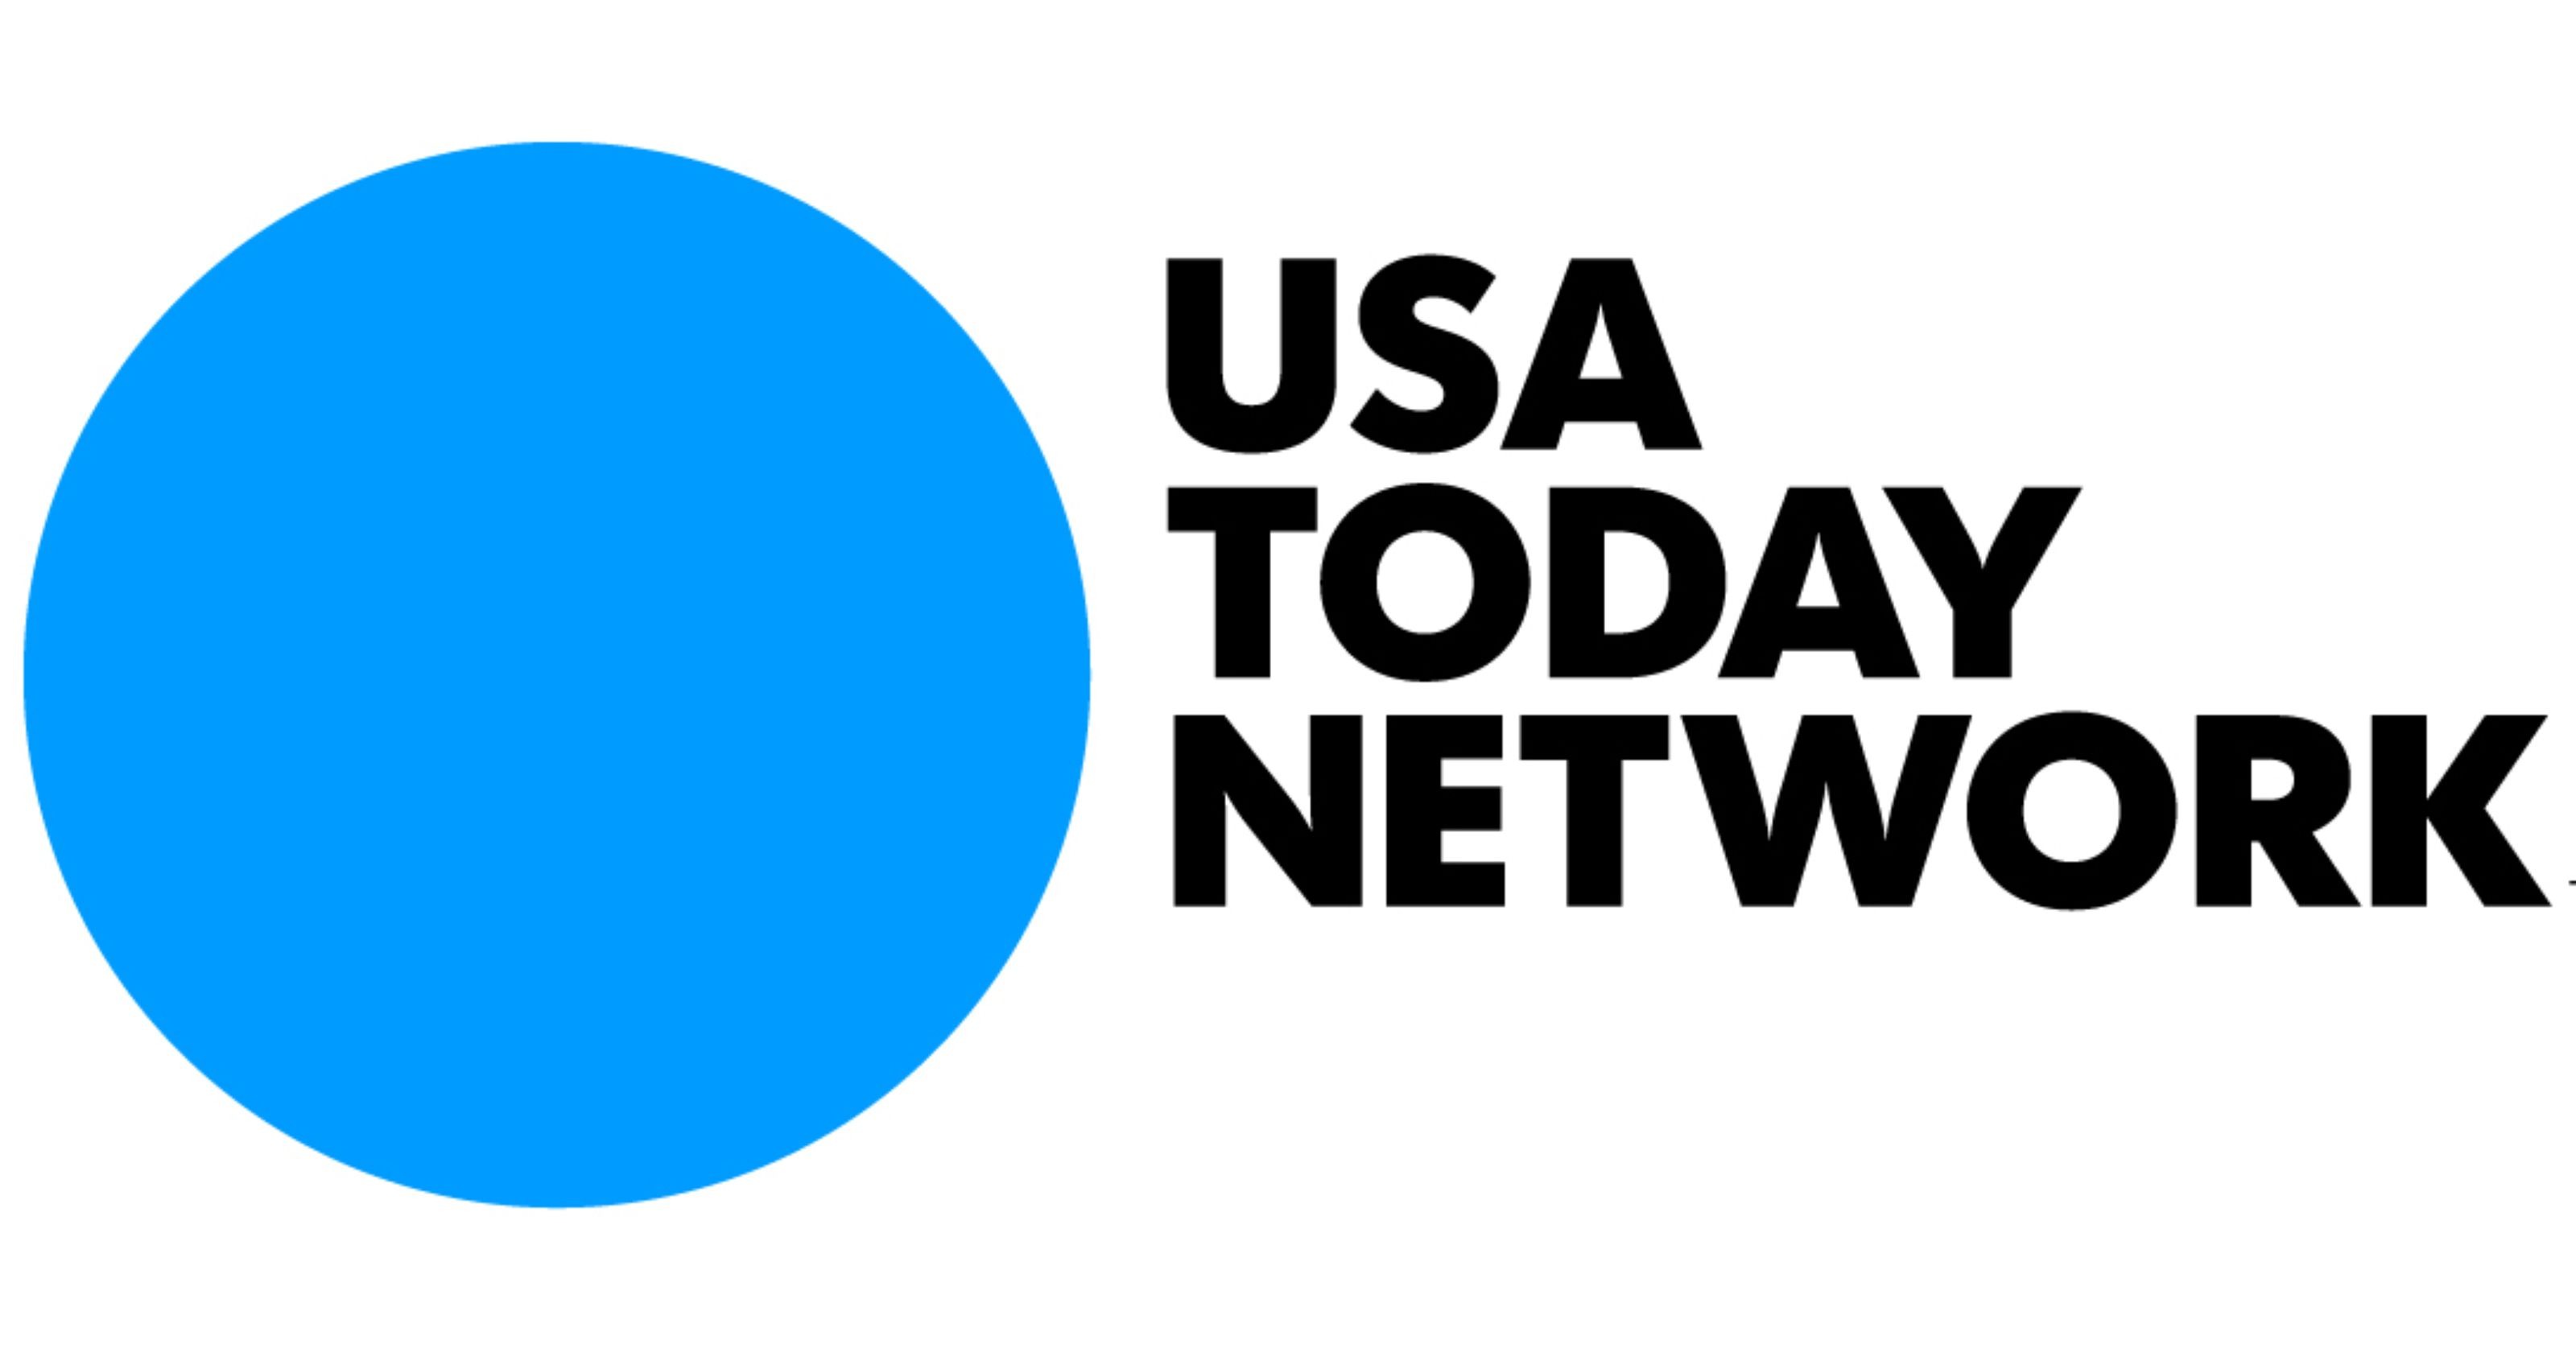 Elevating the USA TODAY NETWORK Brand: More Than a Newspaper Company - Logo - https://s41078.pcdn.co/wp-content/uploads/2018/08/usatodaynetwork-logo.jpg